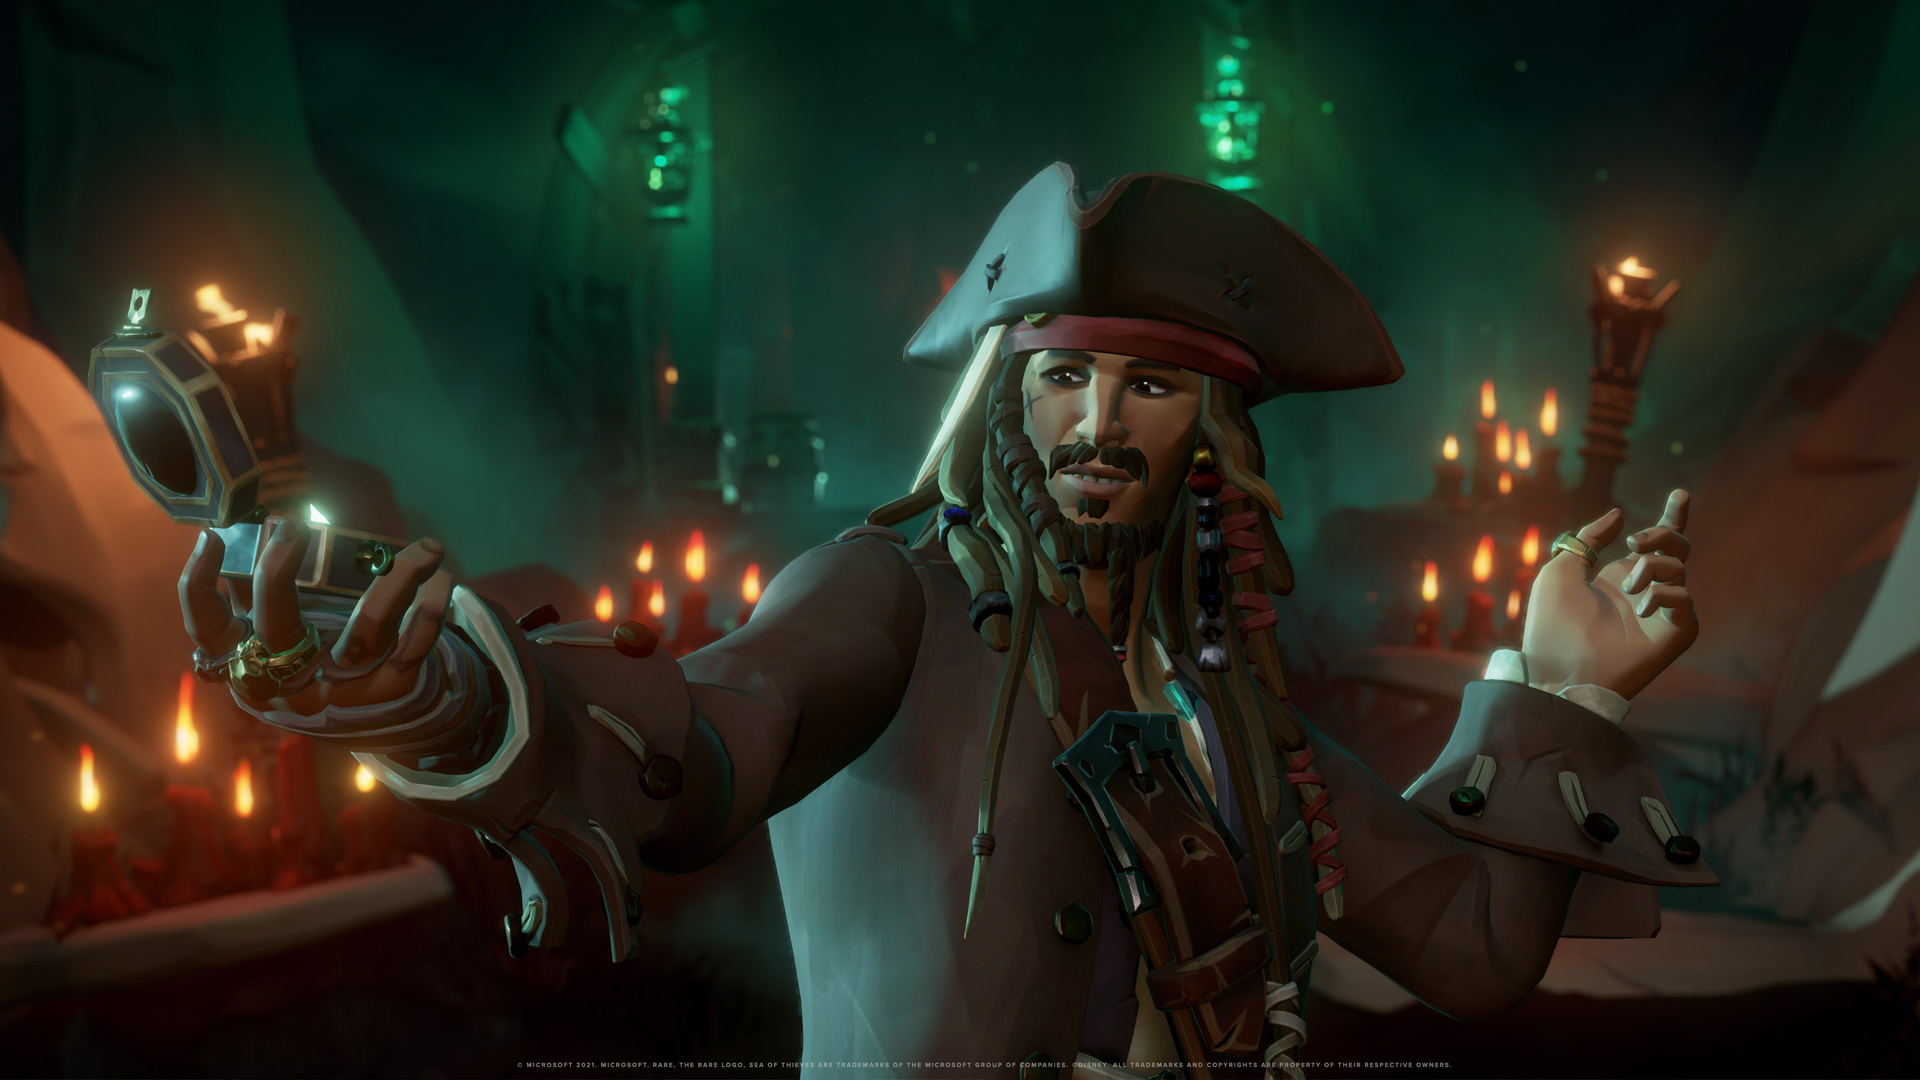 Johnny's Game of the Year 2018 - Sea of Thieves 